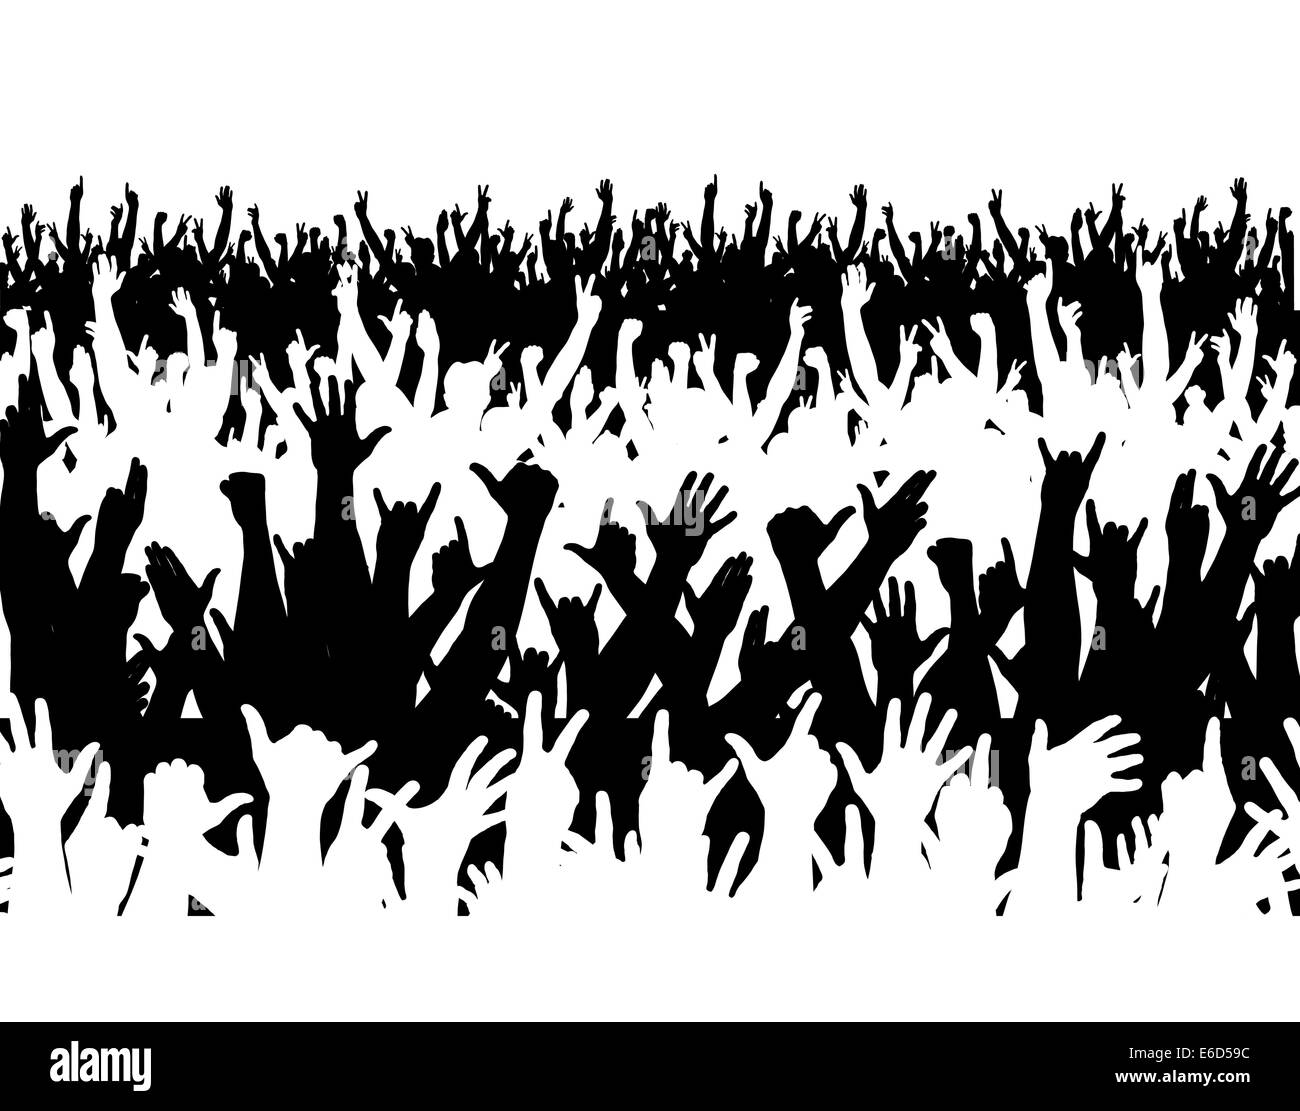 Editable vector illustration of a large crowd Stock Vector